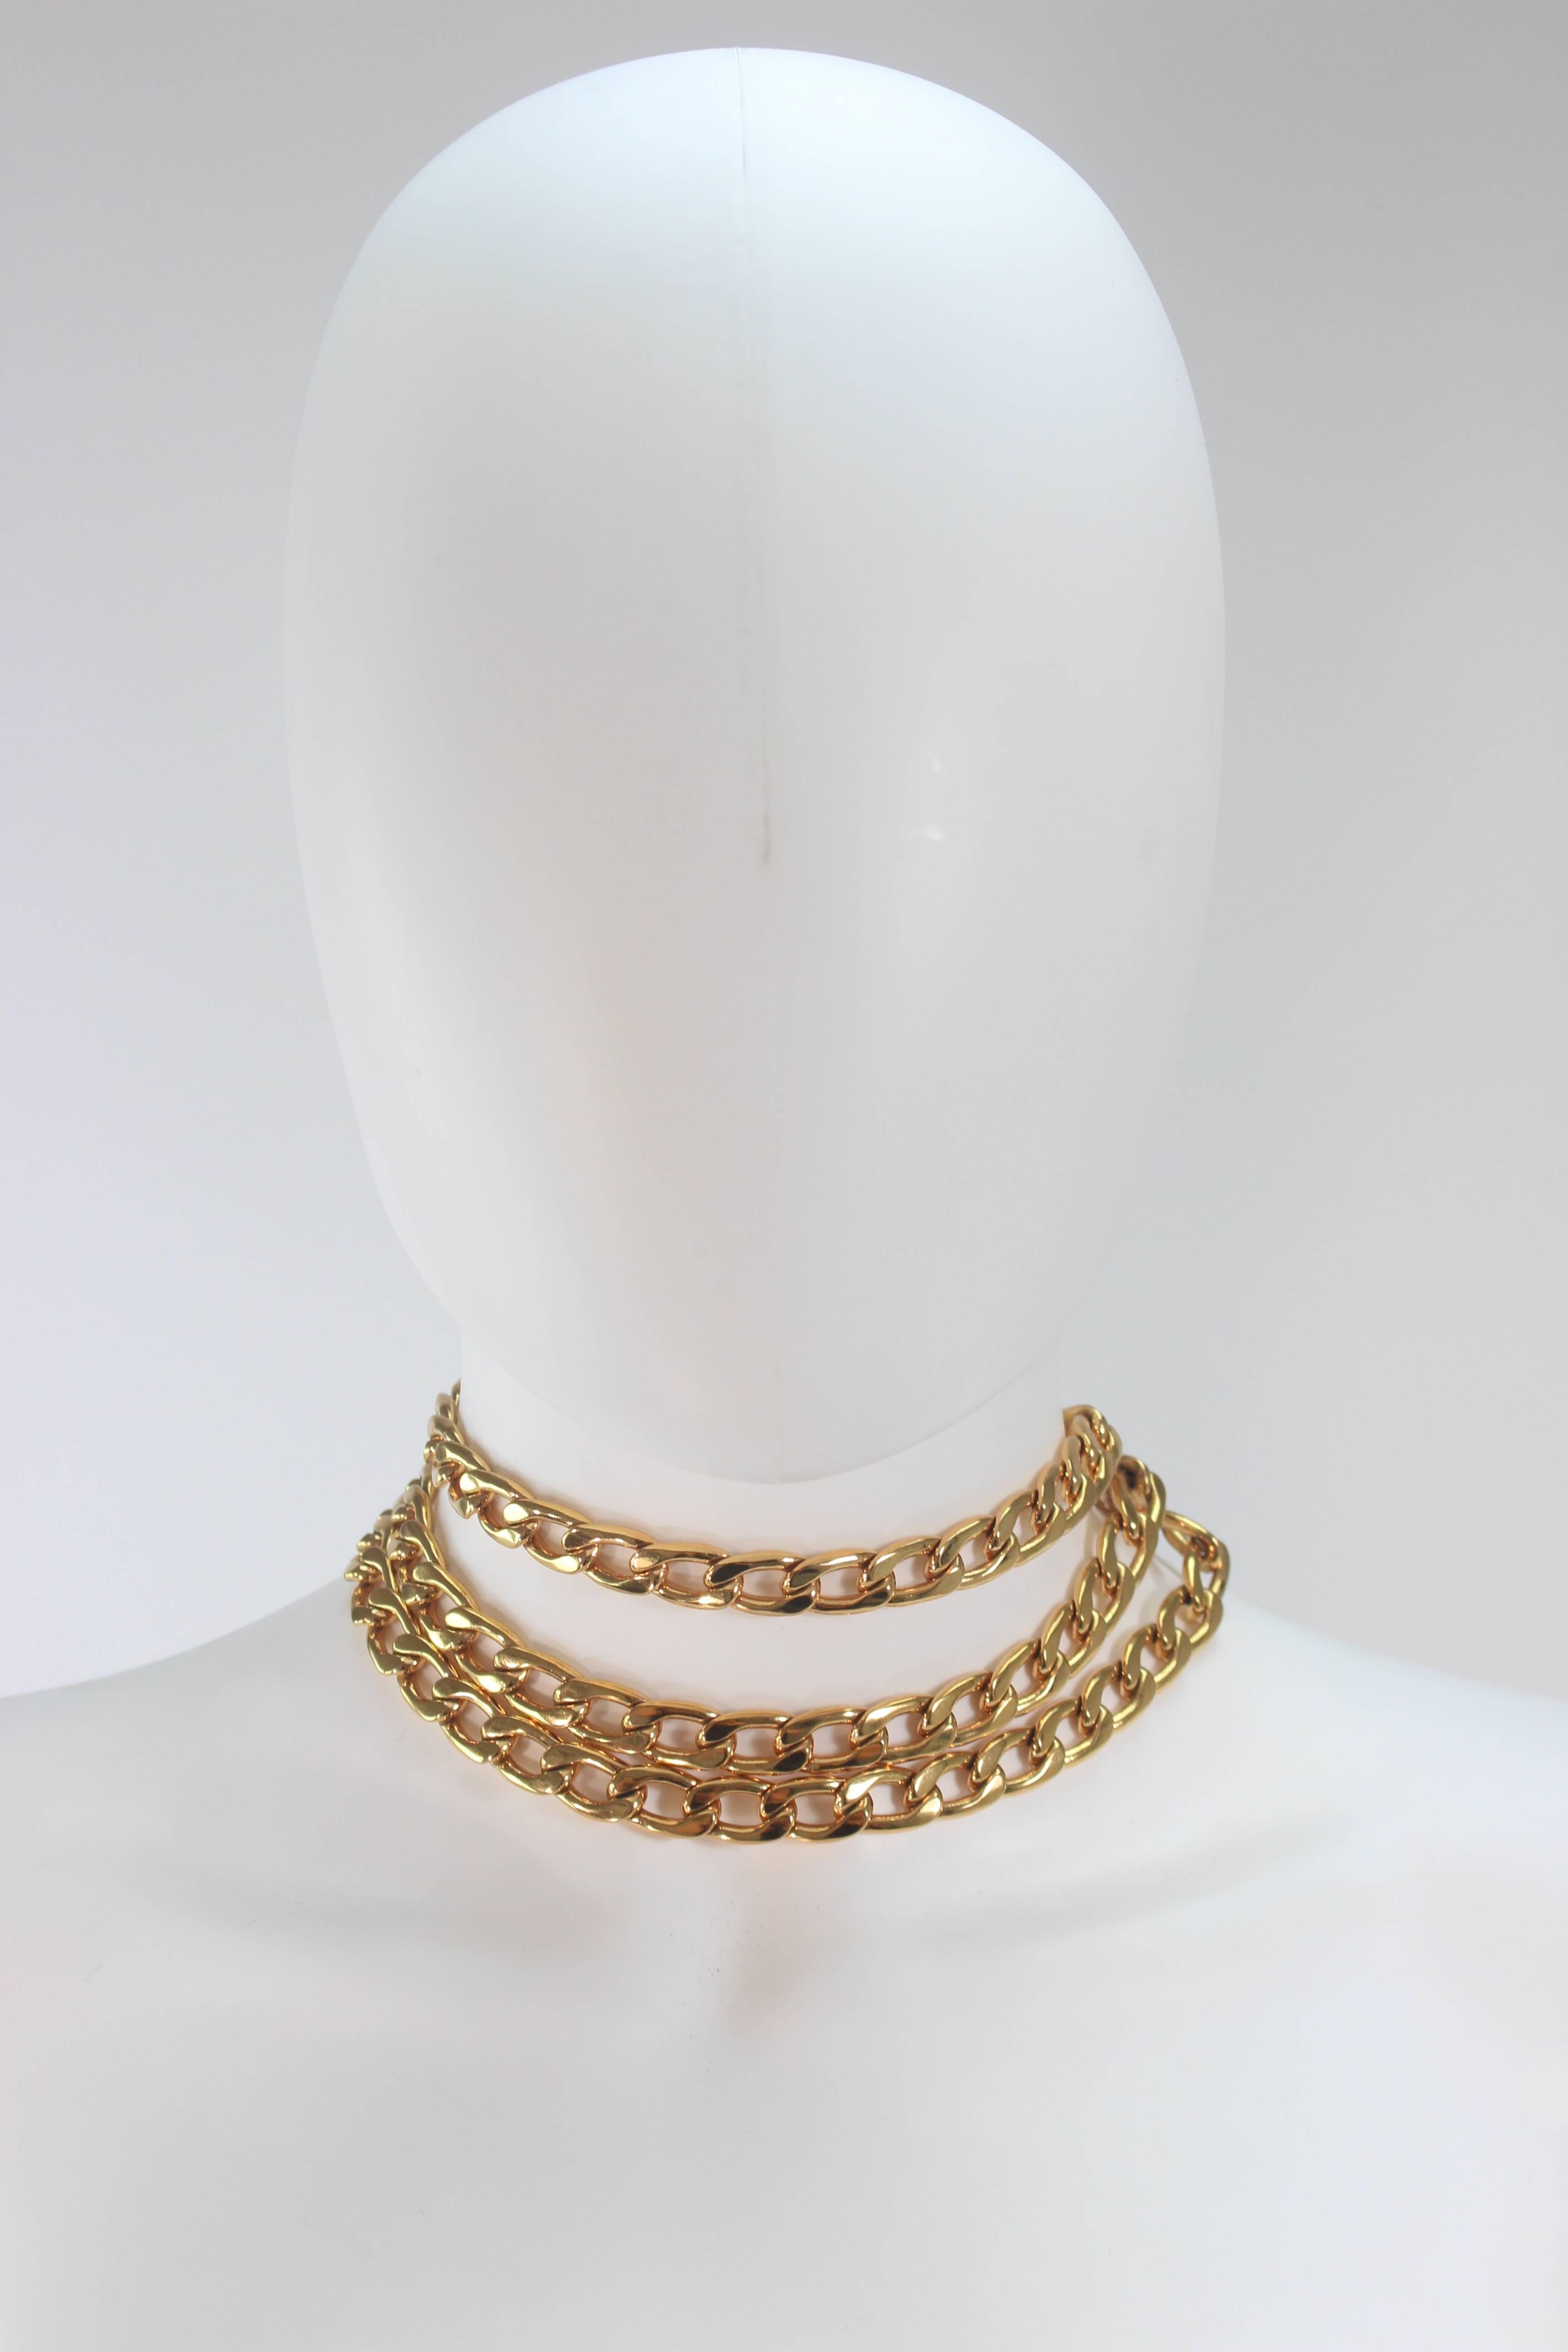 CHANEL 1991 Gold Tone Triple Strand Detail Chain Link Belt Necklace Open Size 5